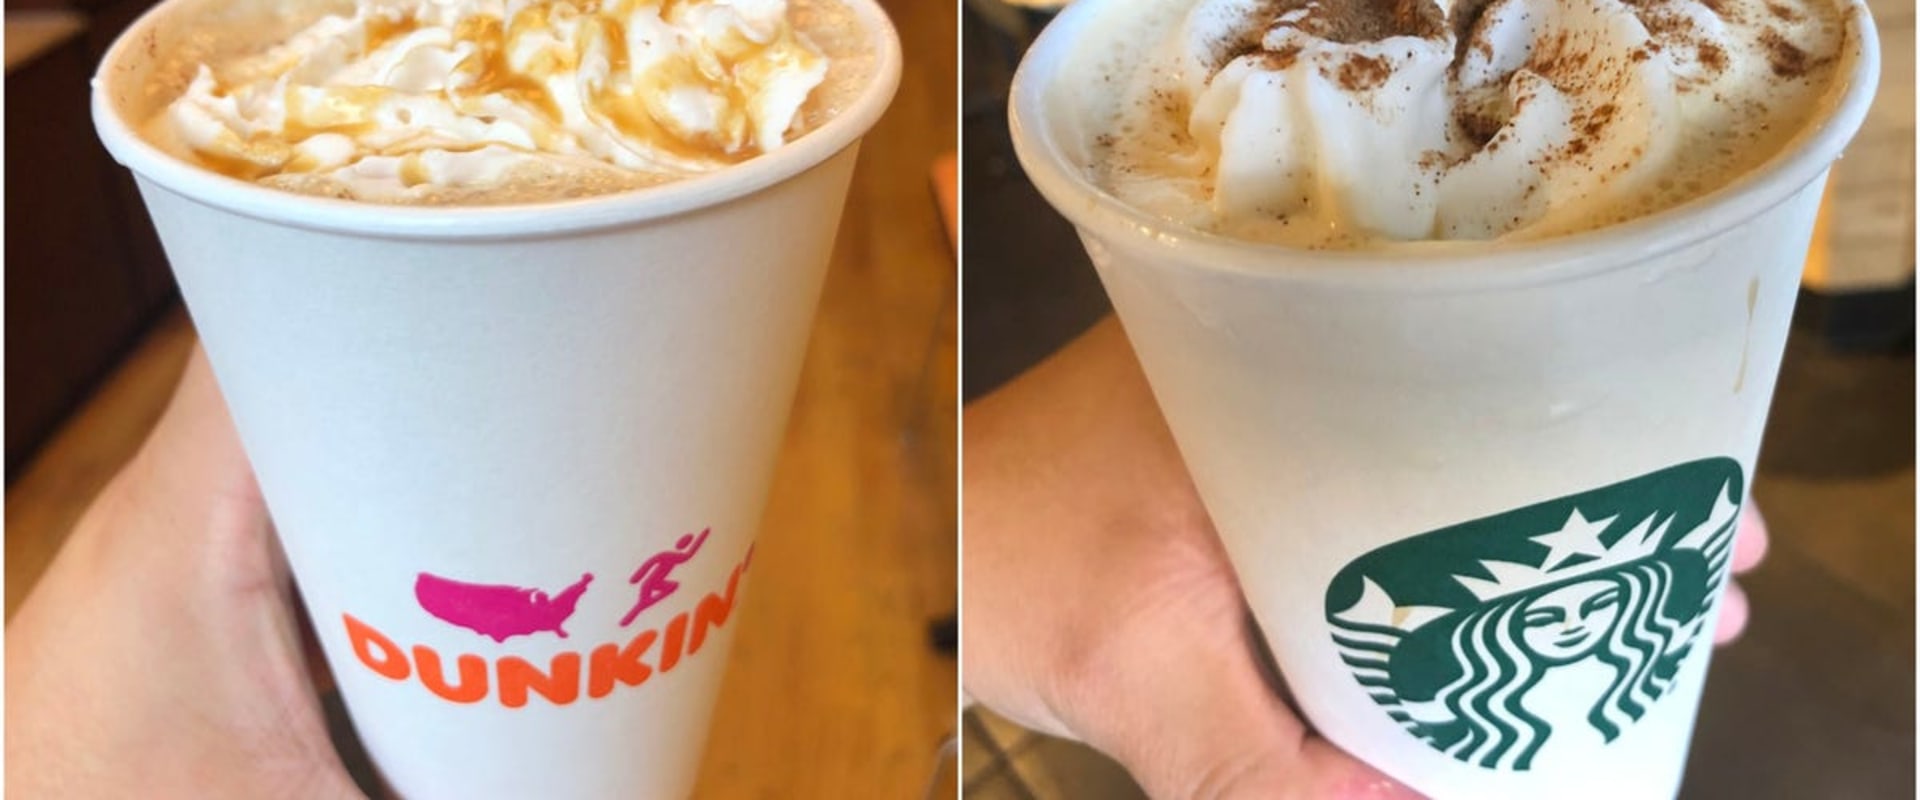 How Many Calories Does Dunkin's Oat Milk Pumpkin Spice Latte Have?